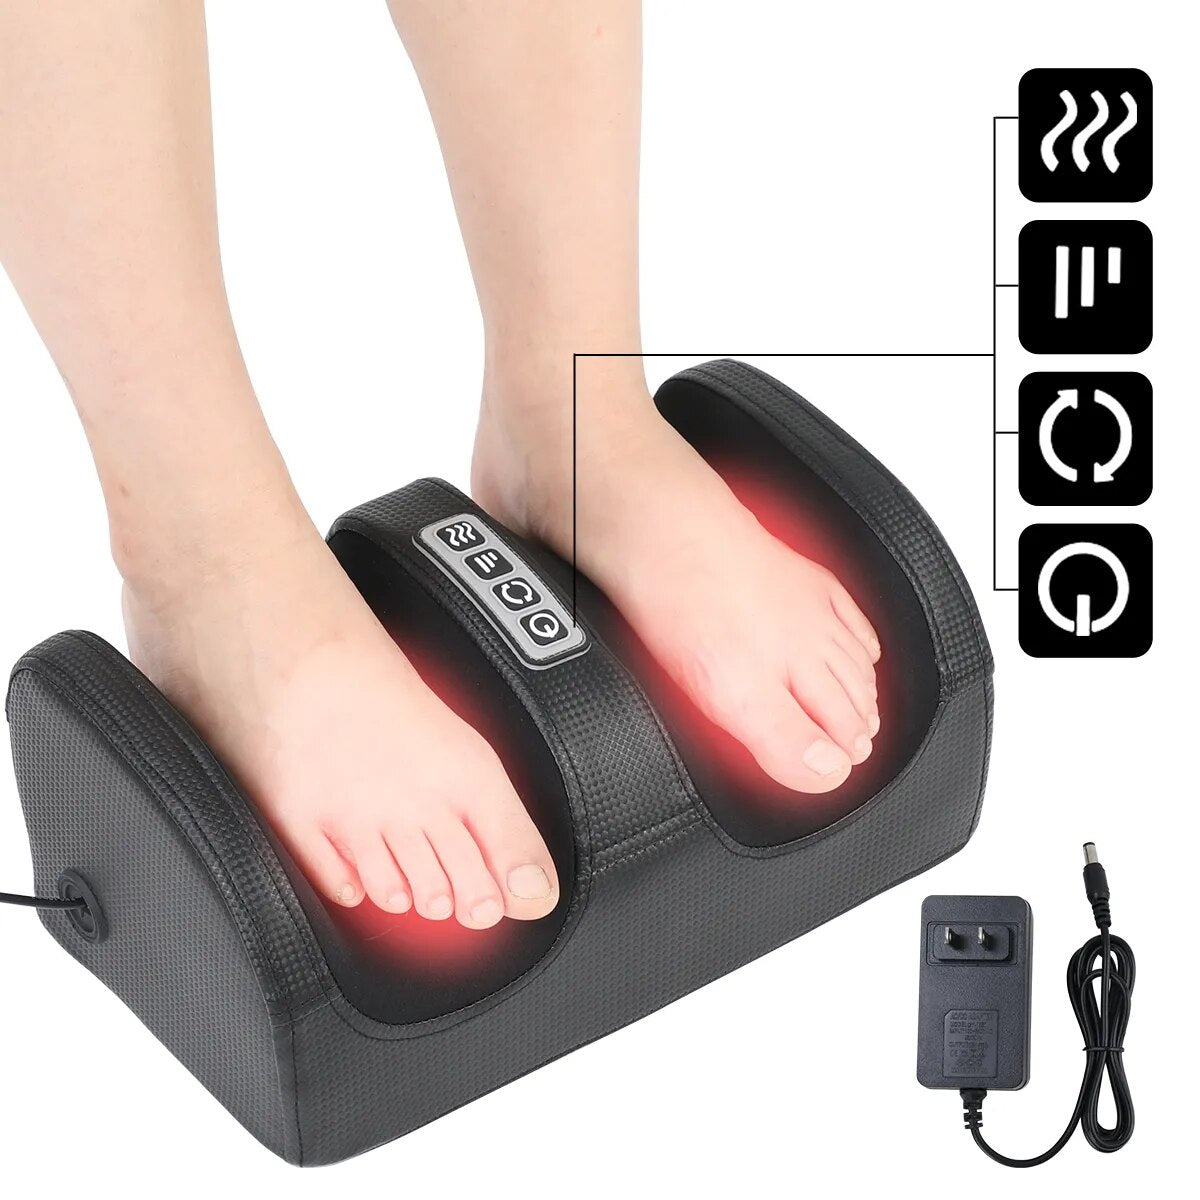 Electric Foot Massager Machine Heating Therapy Shiatsu Kneading Roller Salud Muscle Vibrator Hot Compression Deep Muscles Relax